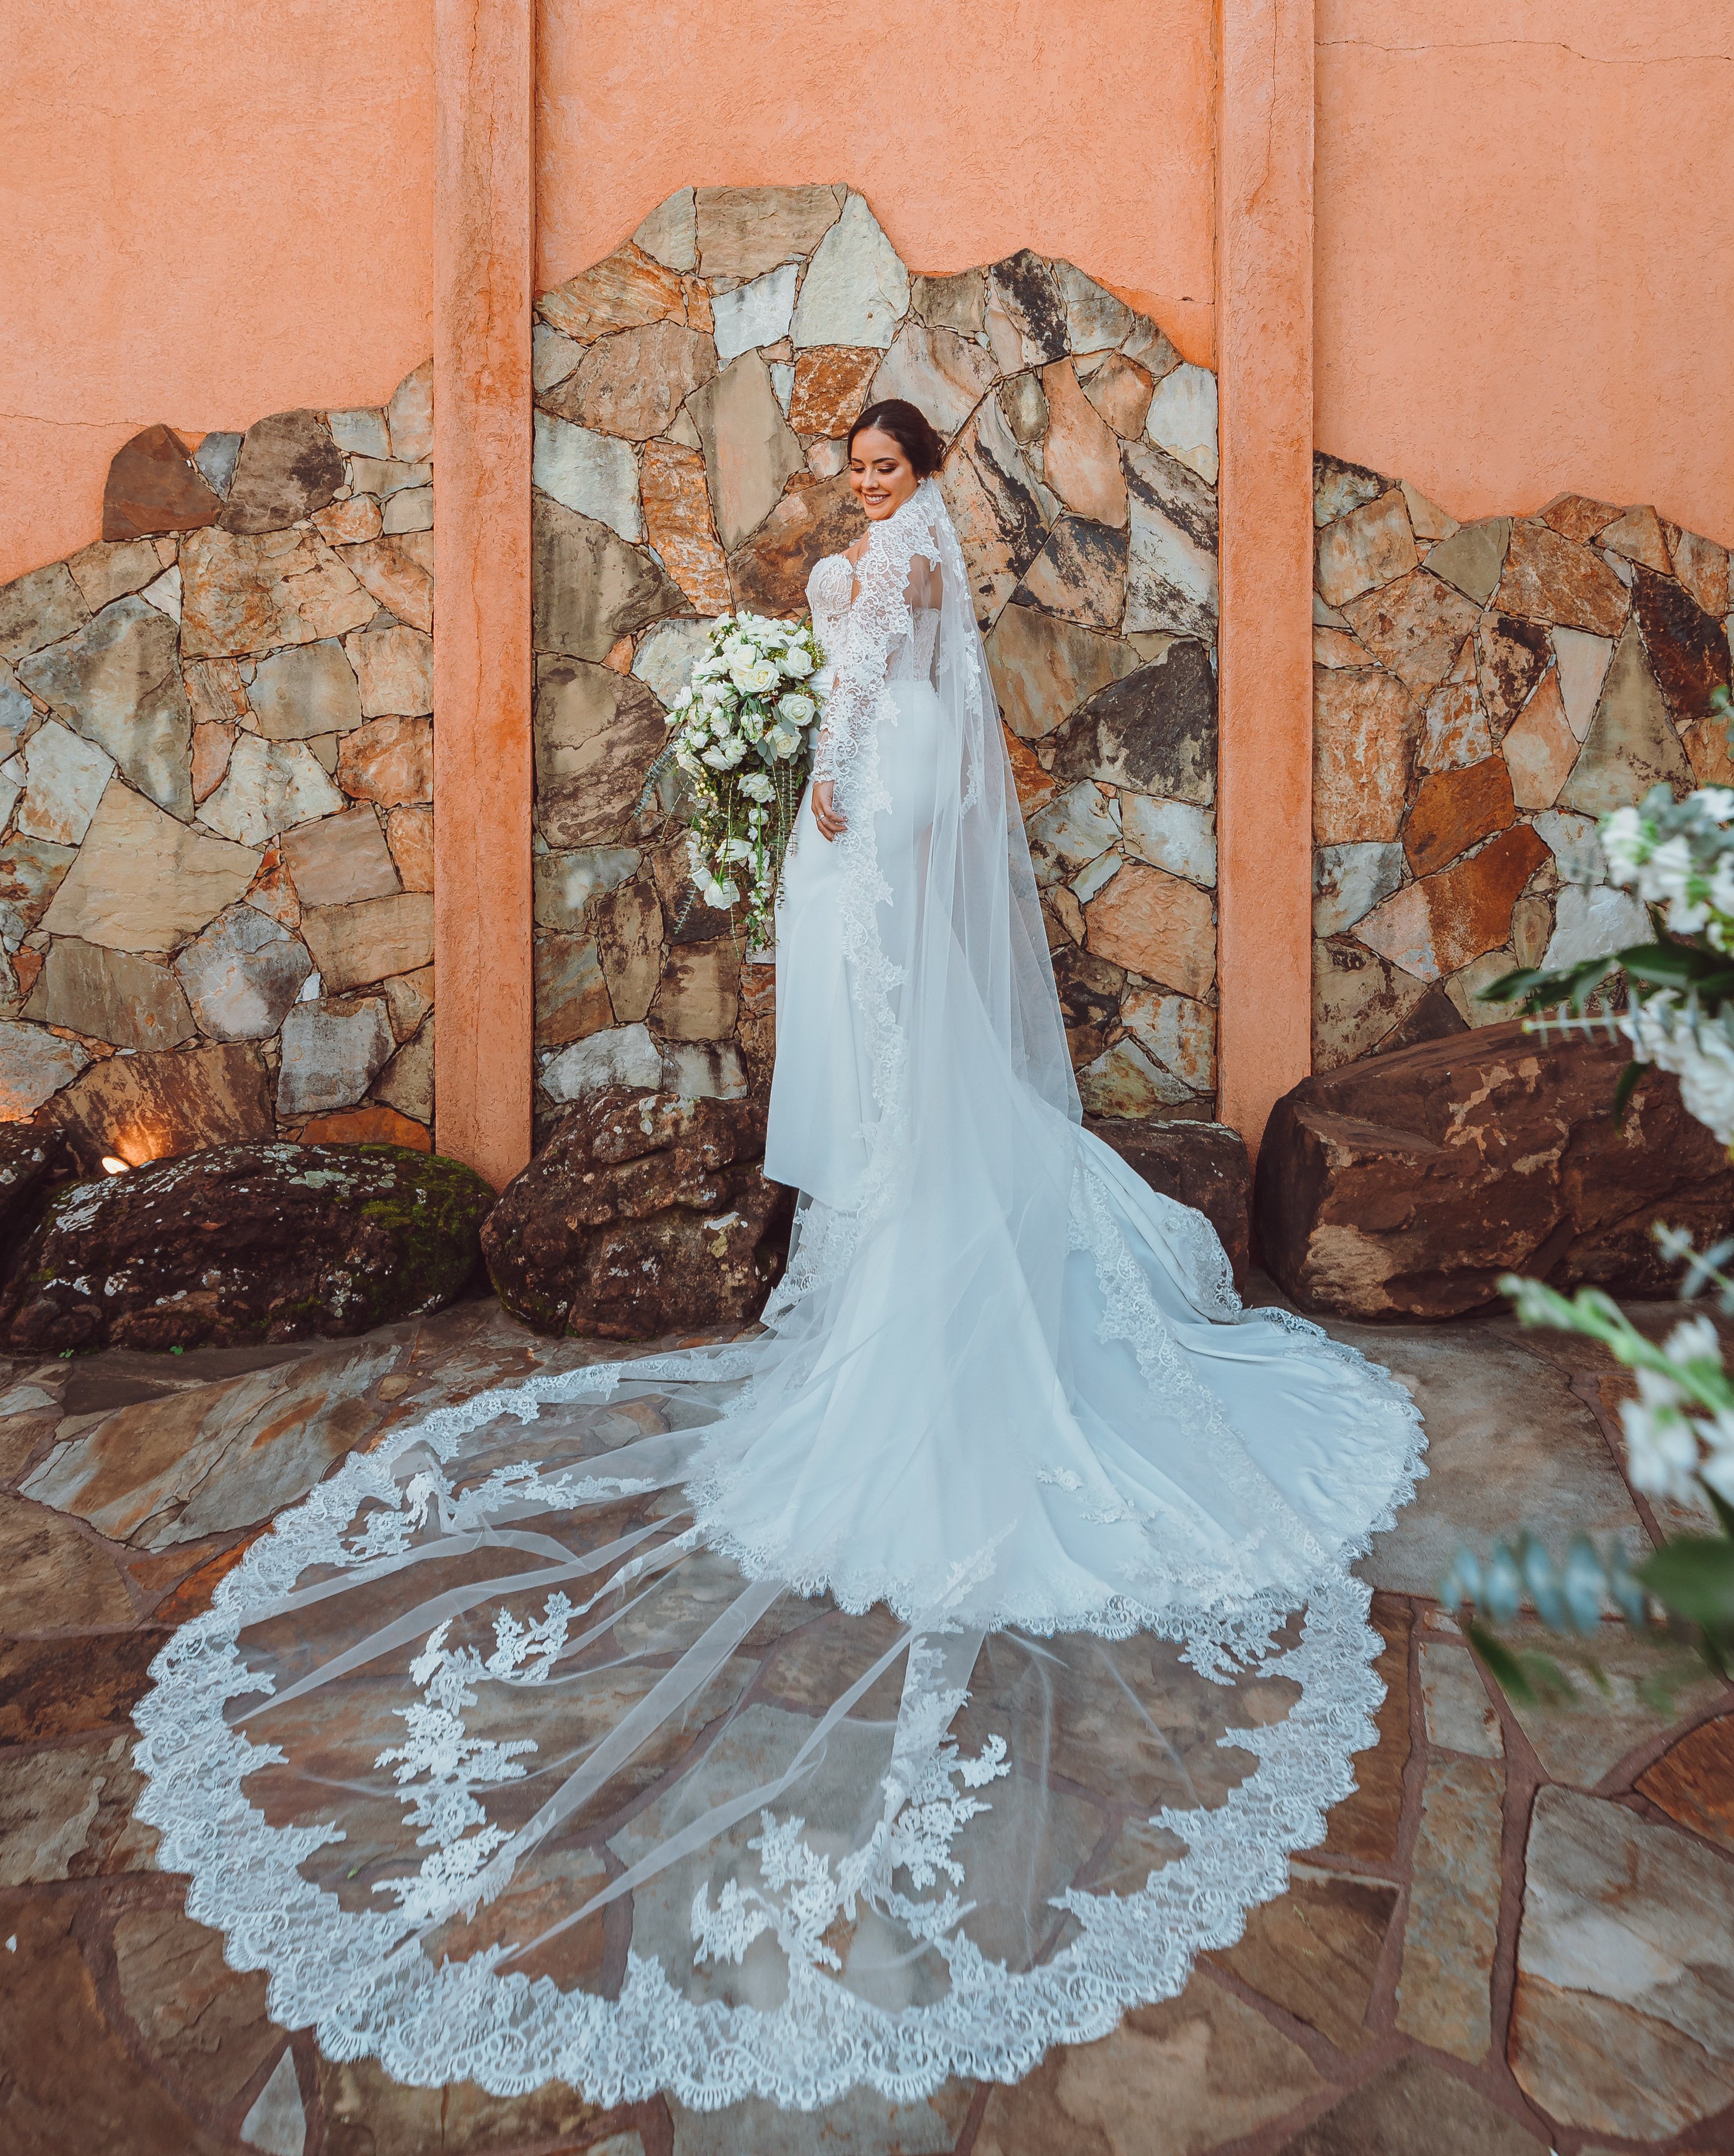 A bride stands against a terra cotta stone wall in her wedding dress. Her veil is spread around her.